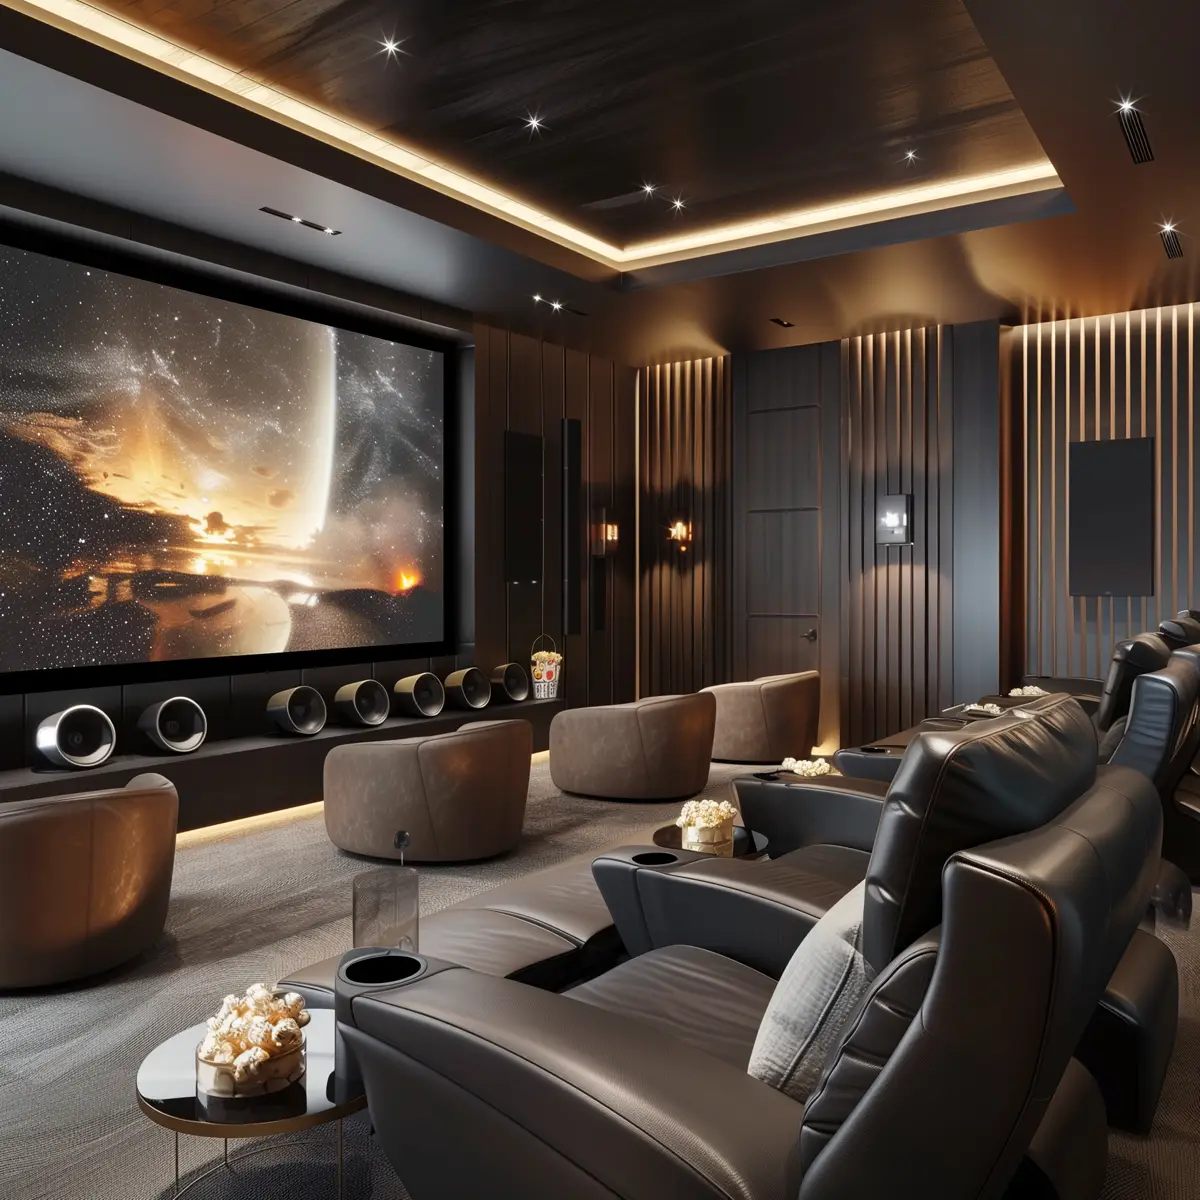 Home Audio and Theater Installation Proposal Concepts